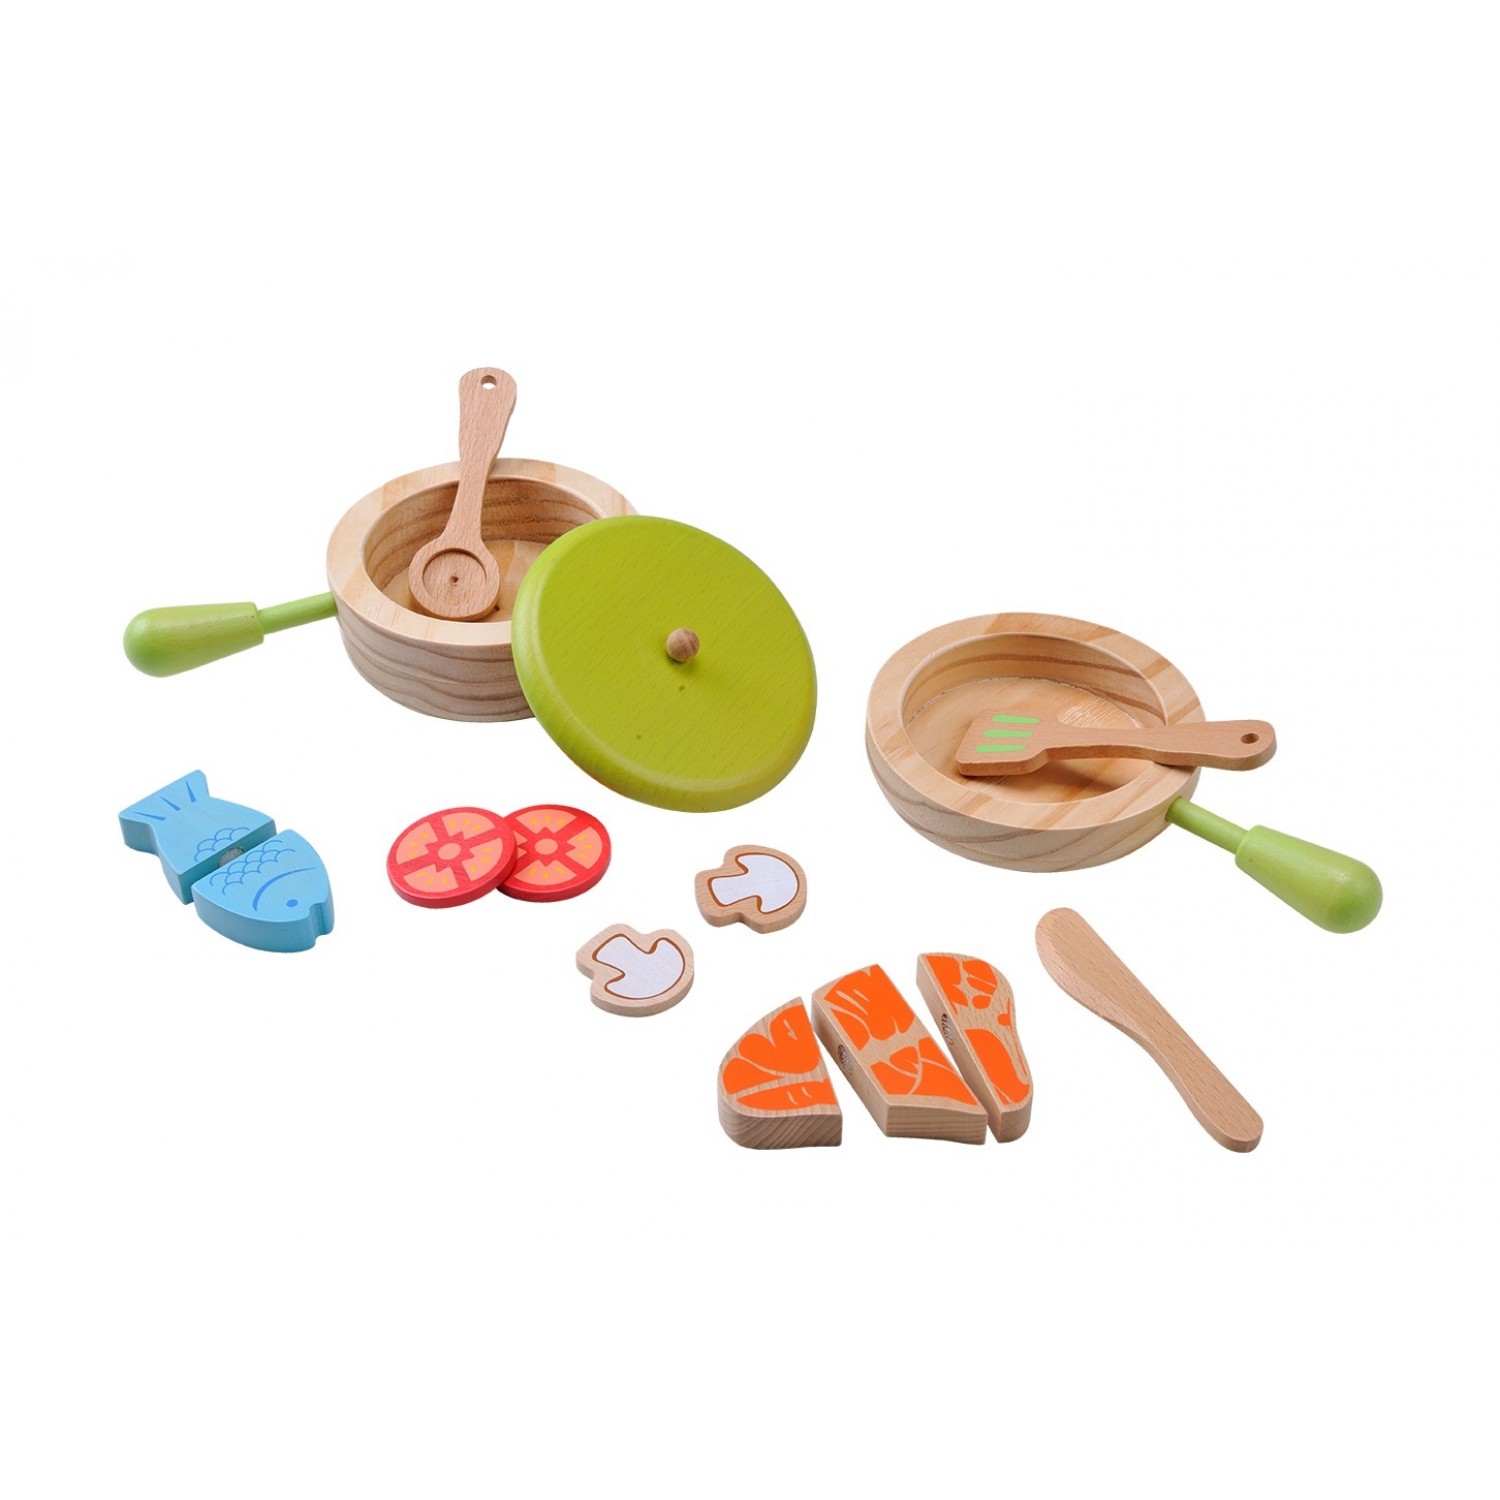 EverEarth eco wooden toy Pot & Pan Cooking Set of FSC wood